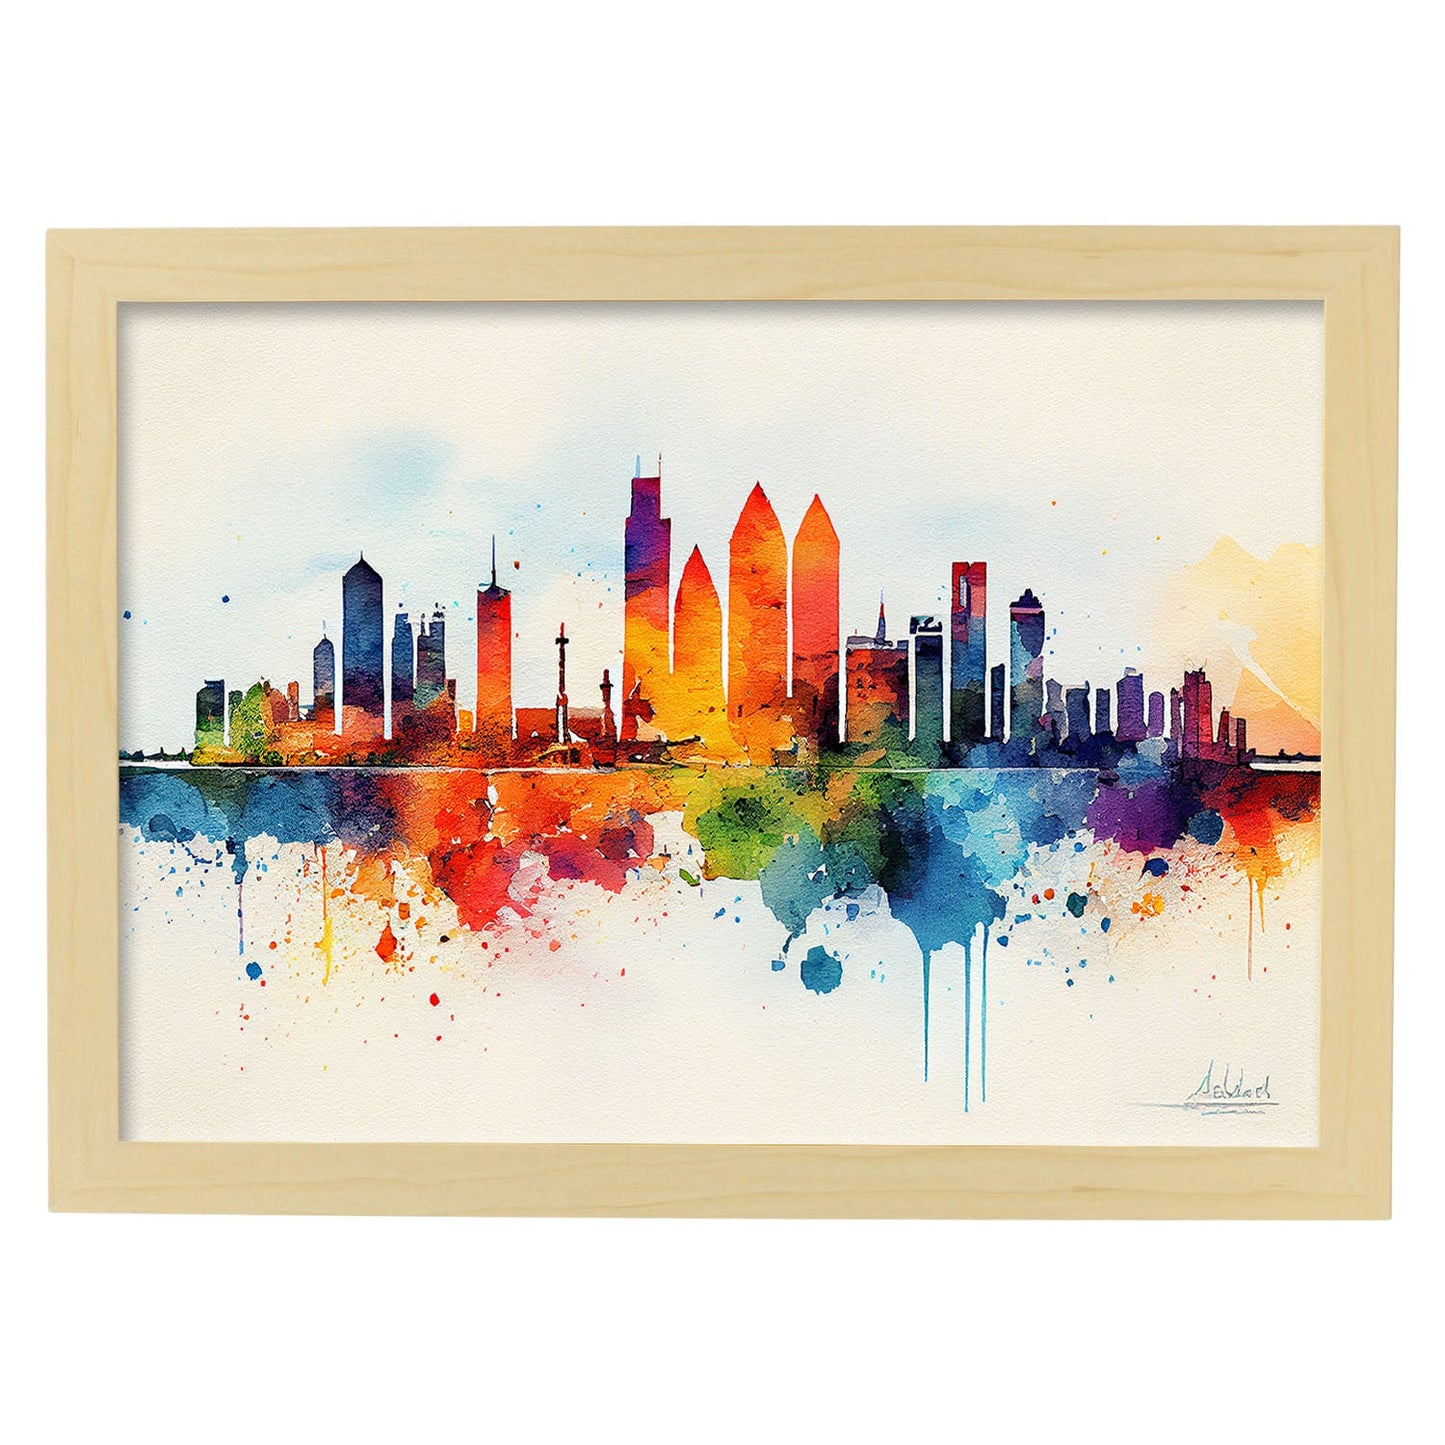 Nacnic watercolor of a skyline of the city of Abu Dhabi. Aesthetic Wall Art Prints for Bedroom or Living Room Design.-Artwork-Nacnic-A4-Marco Madera Clara-Nacnic Estudio SL